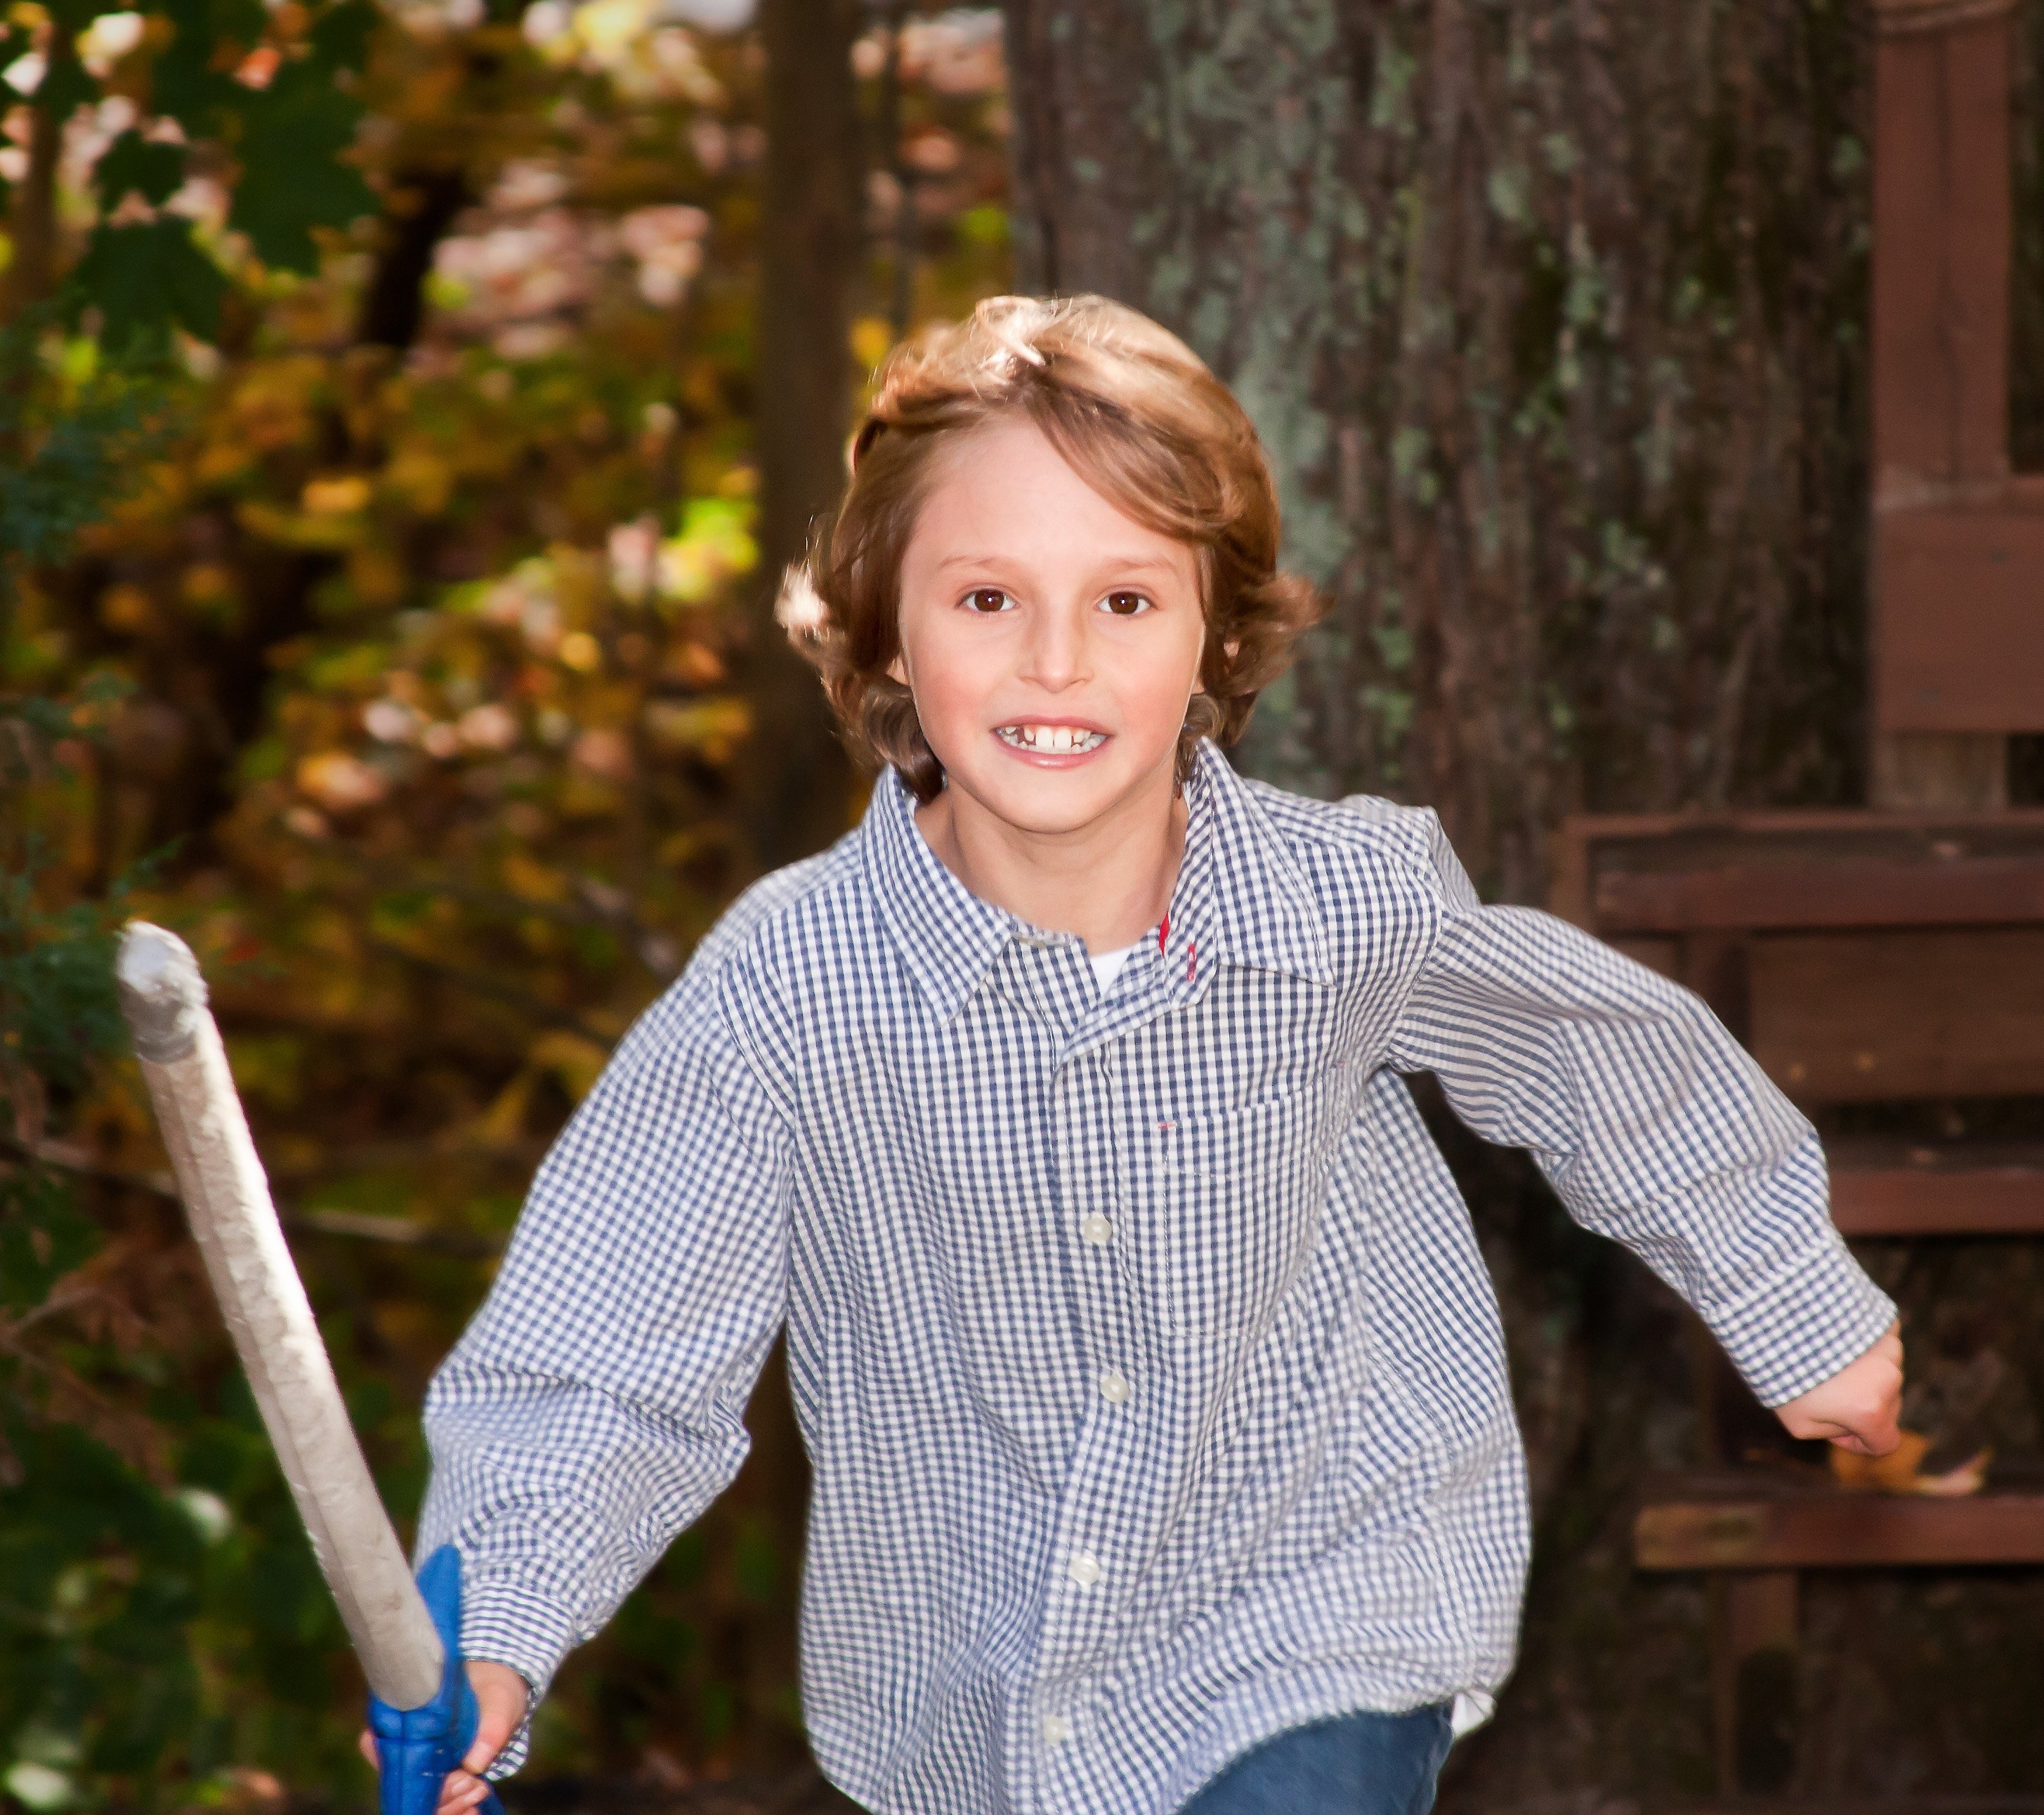 young boy caught mid action as he runs with a pretend sword towards a battle